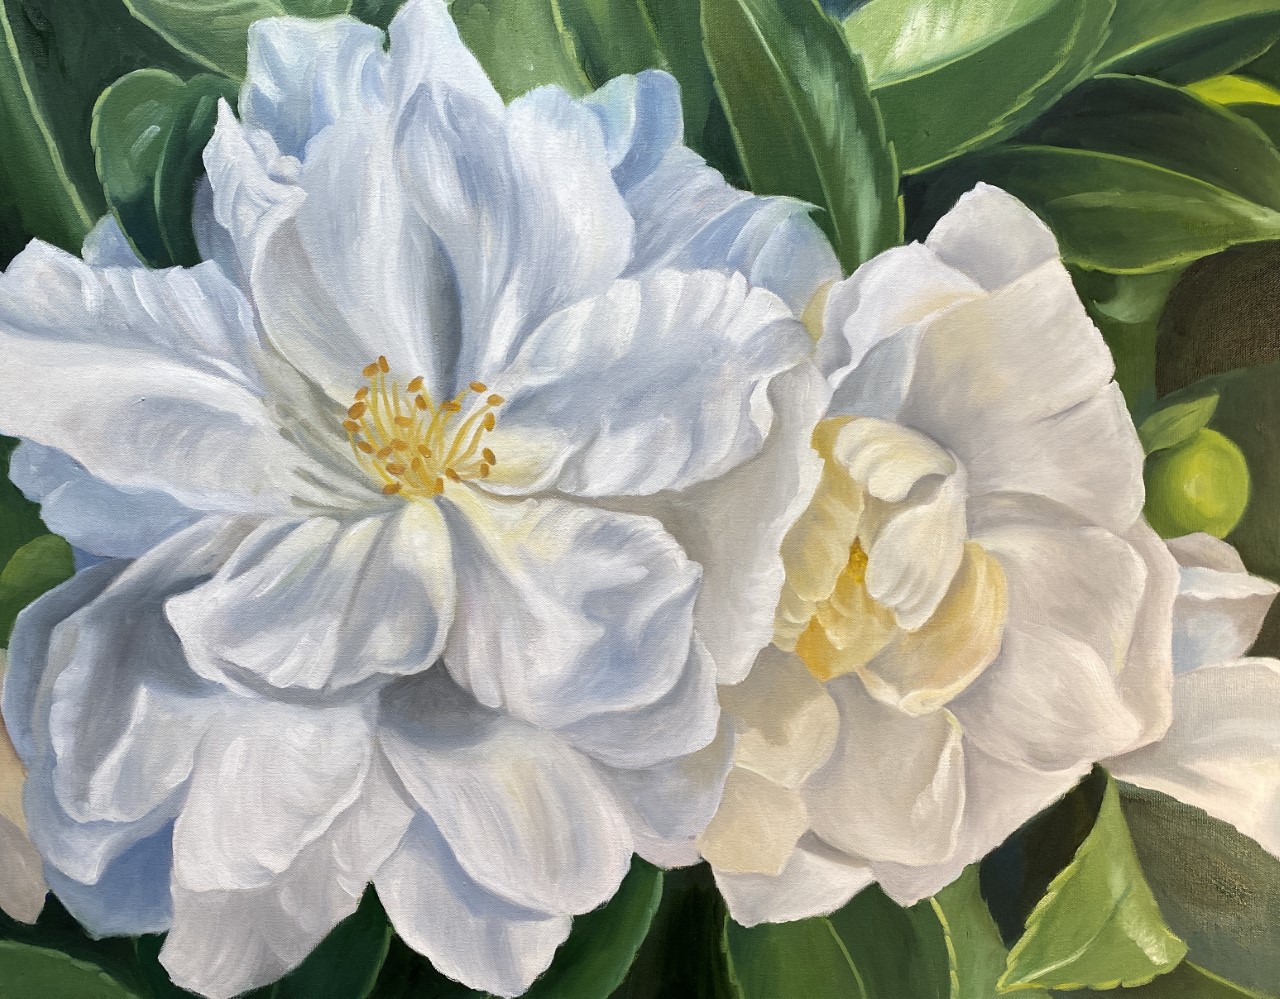 Spring Bloom
Kay Hofler
Oil
24 x 30
Description: Delicate camellias in bloom, one bright and beautiful, the other beginning to fade. The background of shiny green leaves contrast the brightness of the flowers.